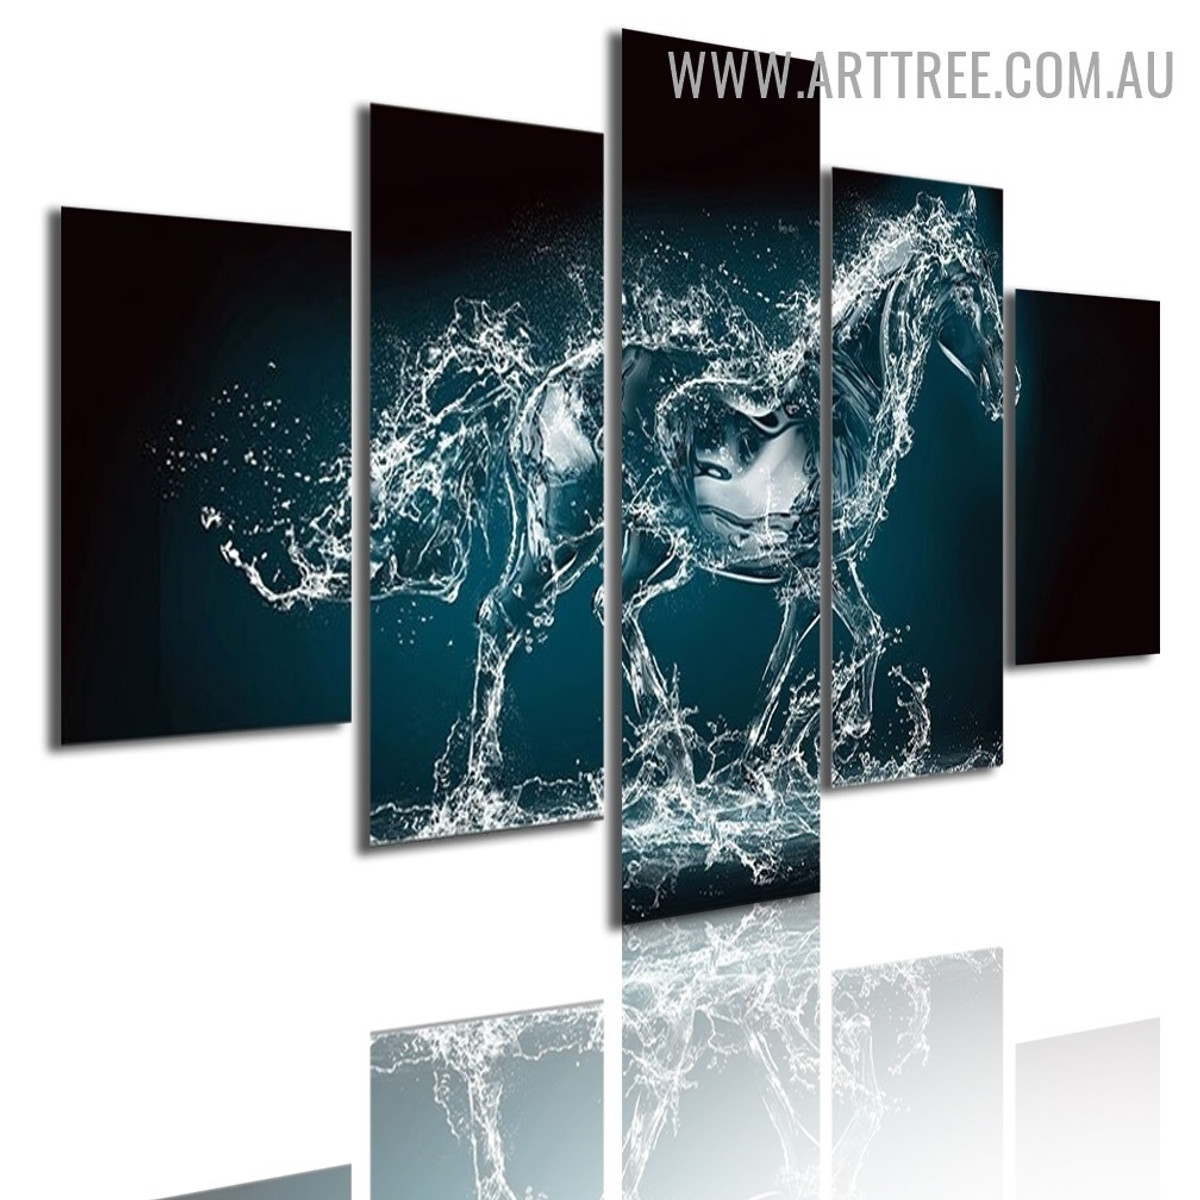 Water Horse Modern Abstract 5 Piece Animal Split Art Image Canvas Print for Room Wall Adornment